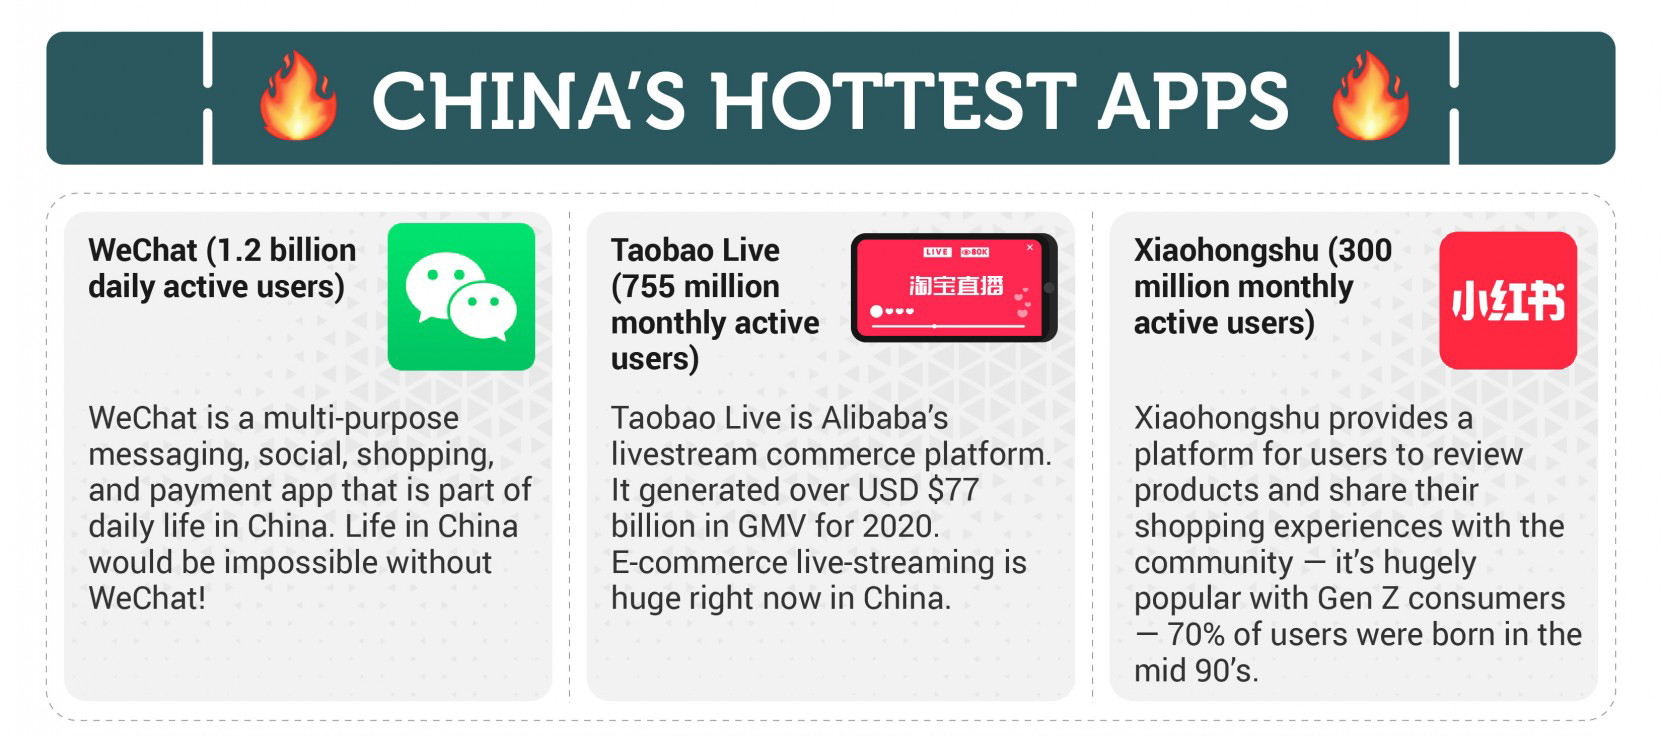 An infographic of China's hottest mobile apps